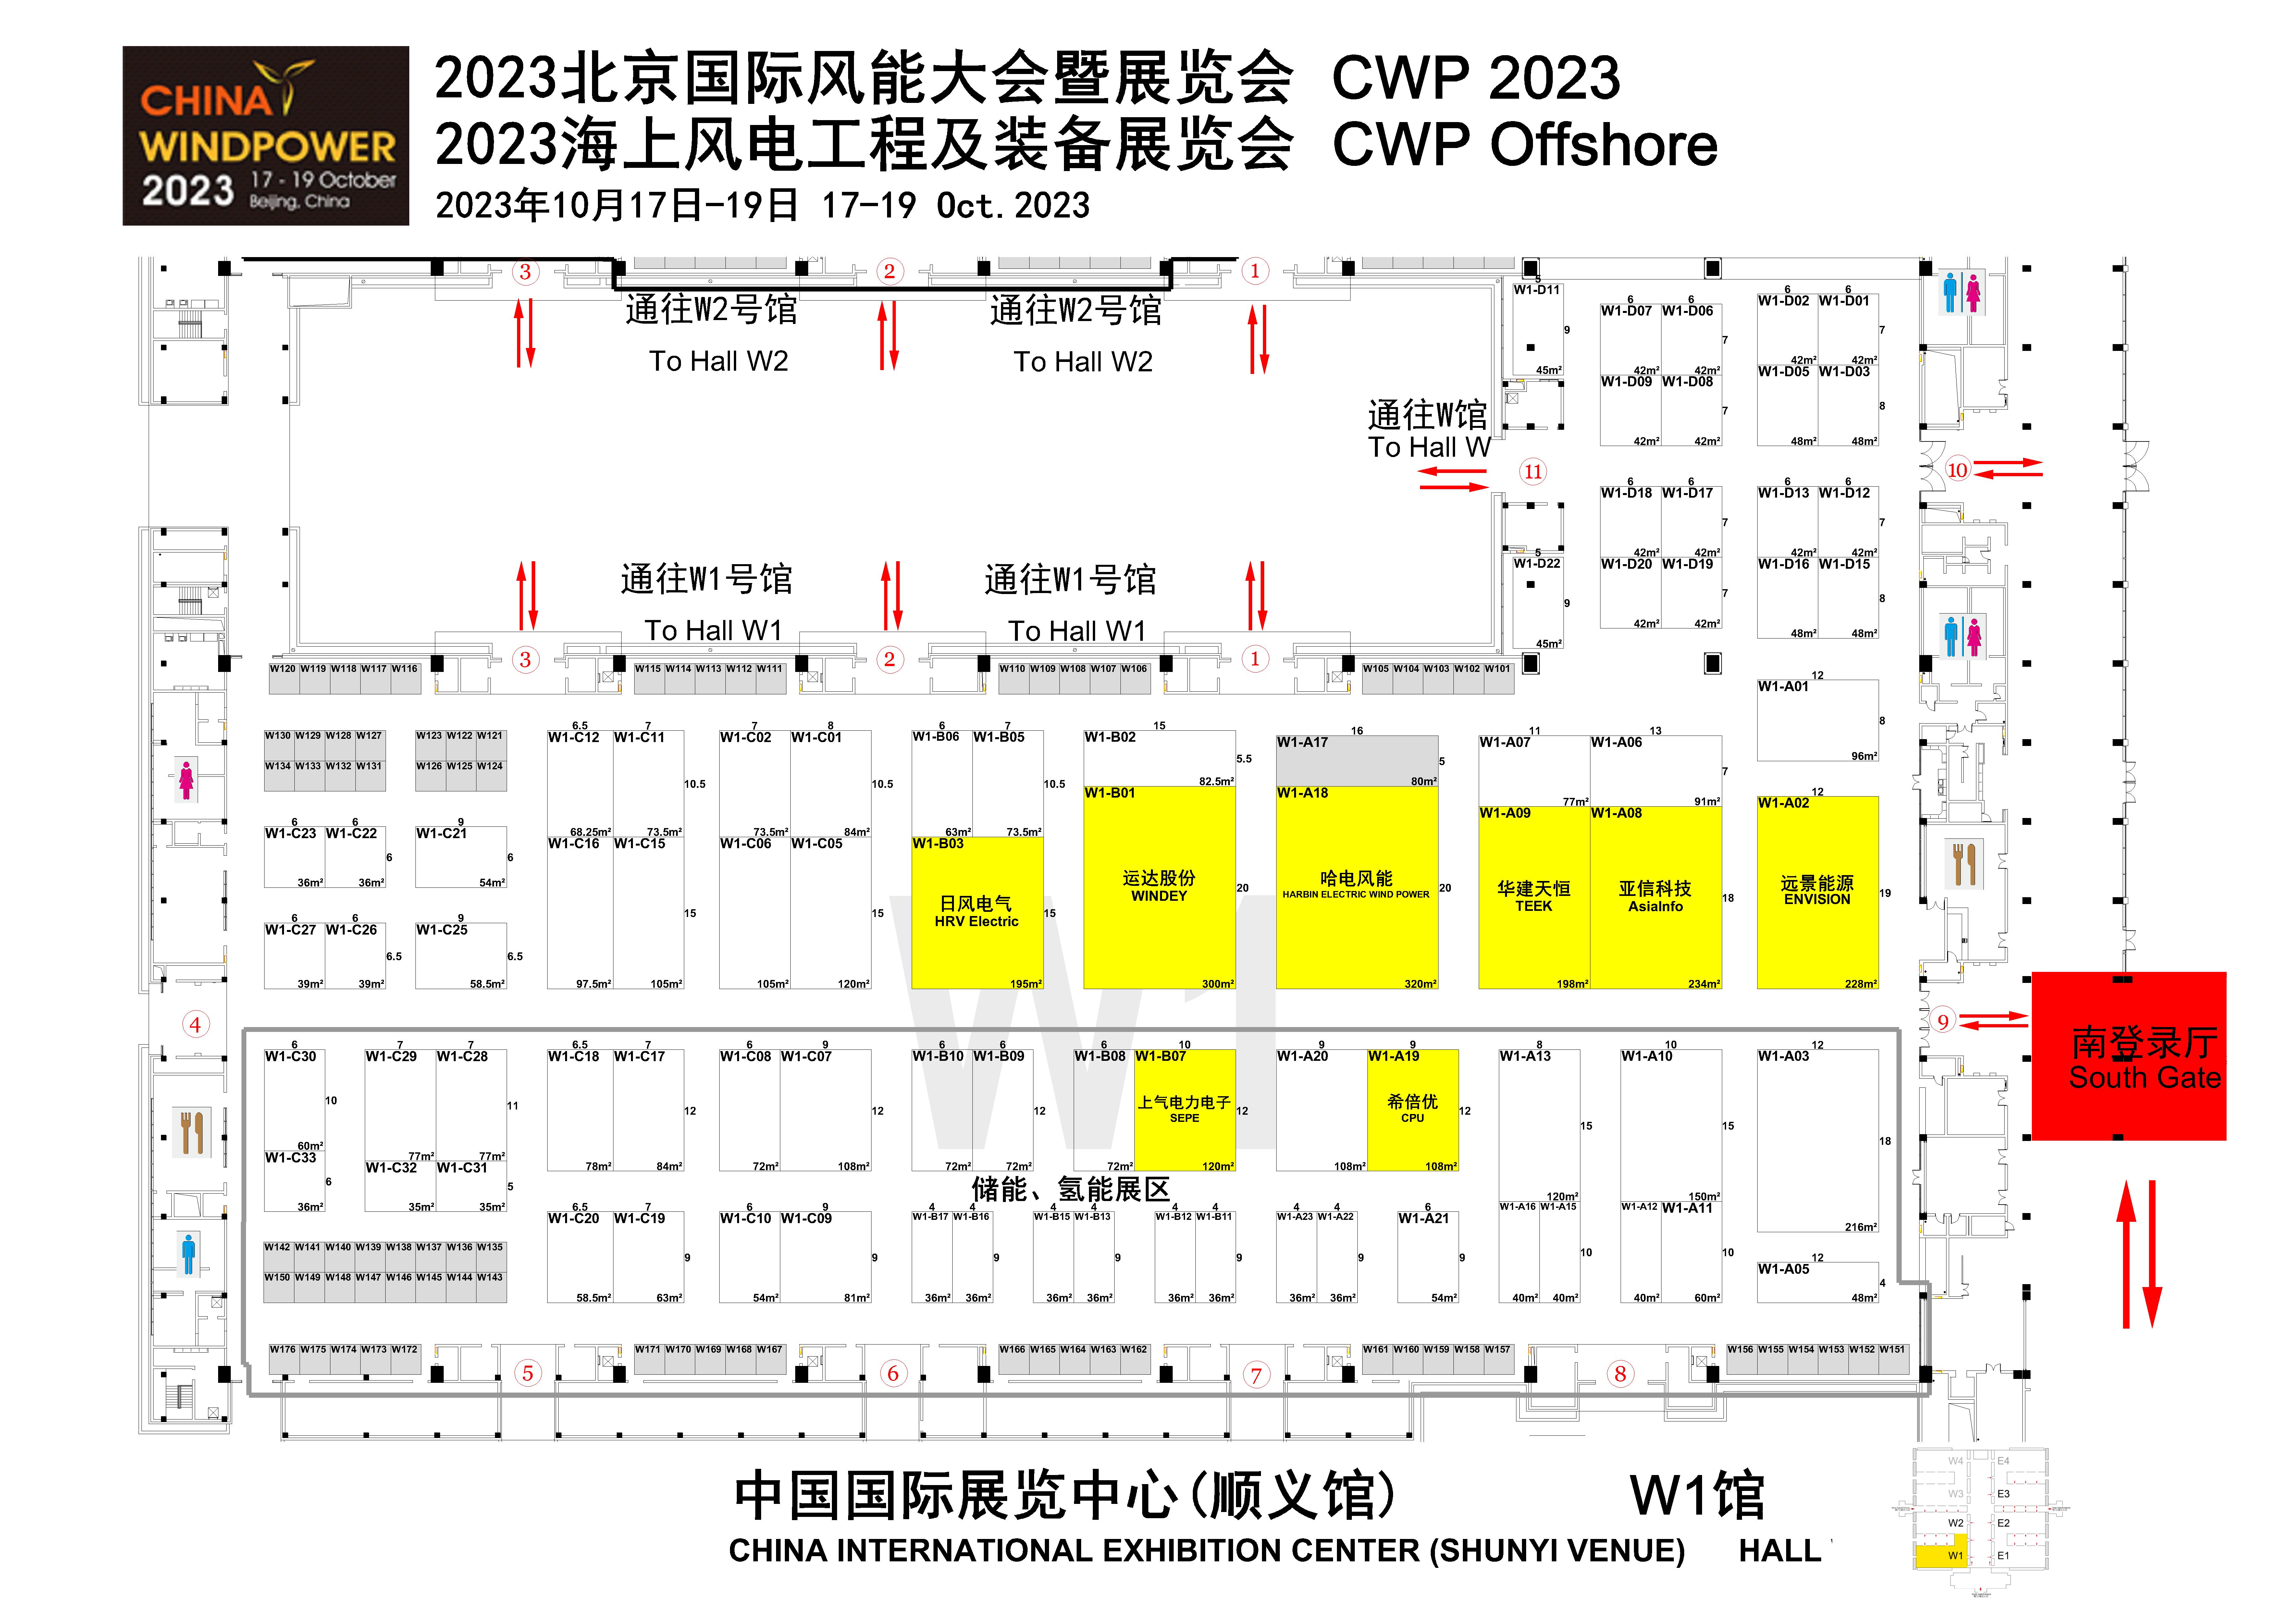 Exhibition Preview | 2023.10.17-10.19 CPU H2 will meet you at CWP2023